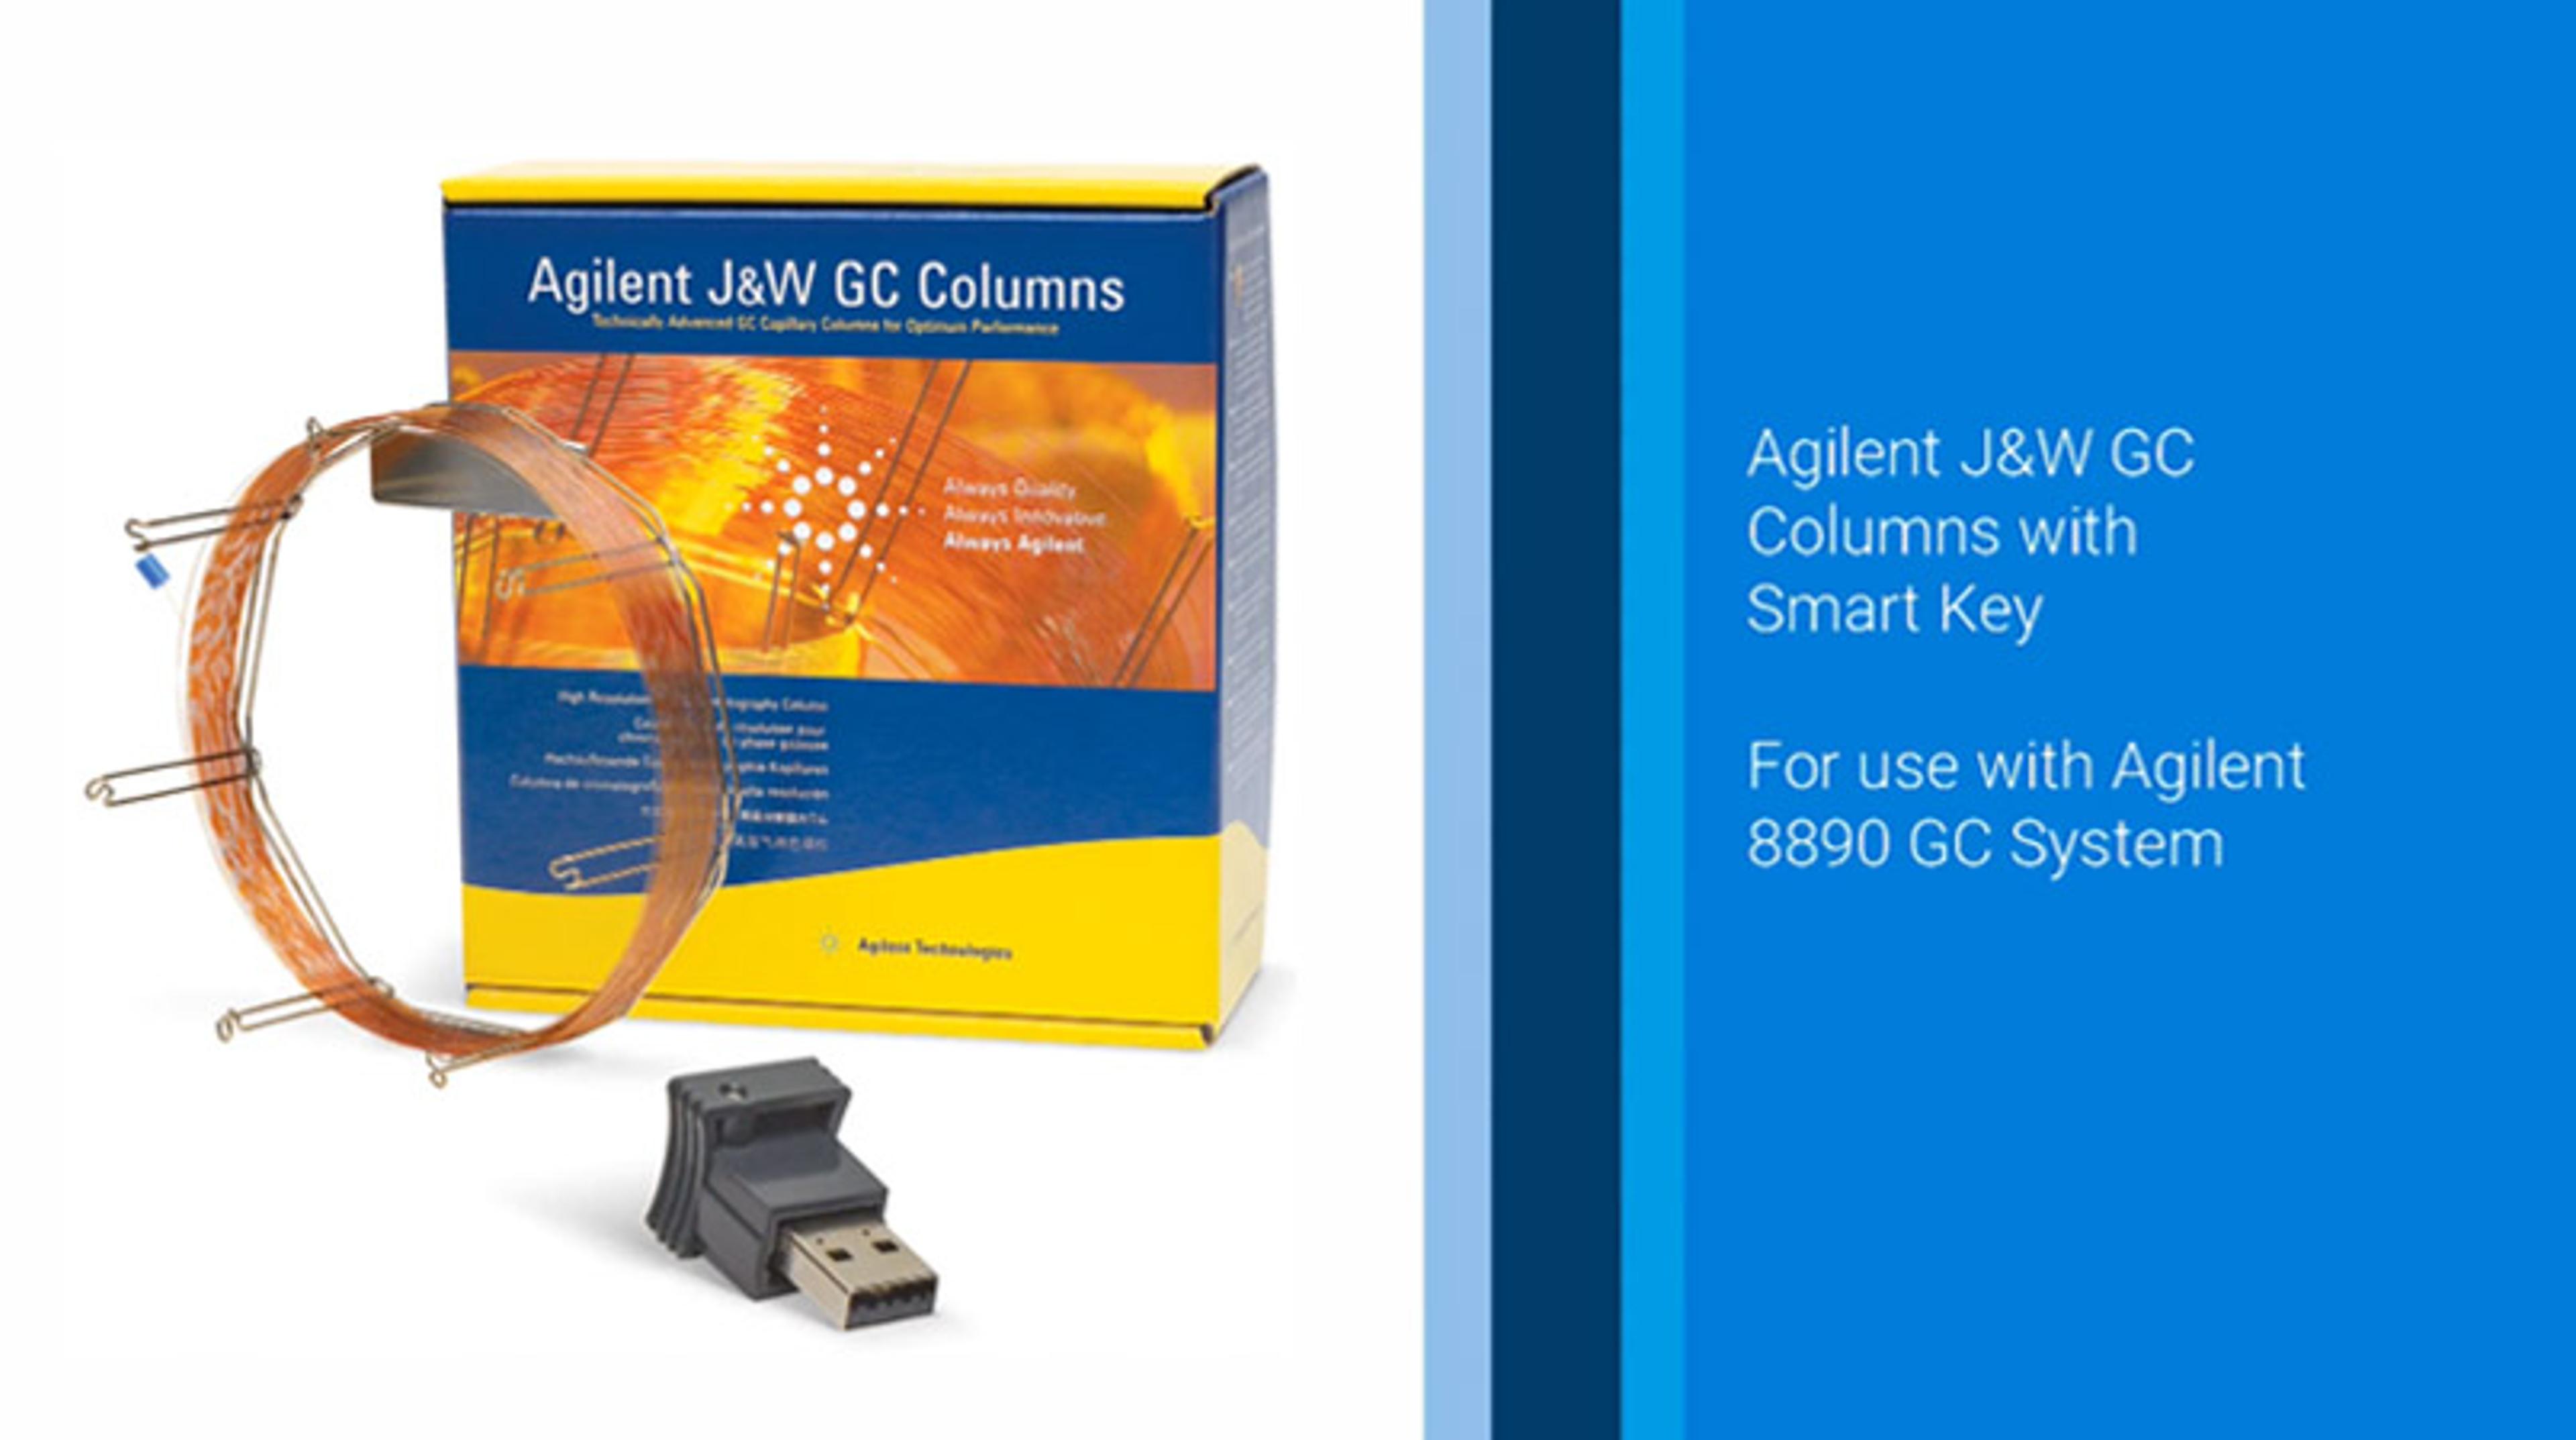 Reduce downtime with Agilent GC column smart key